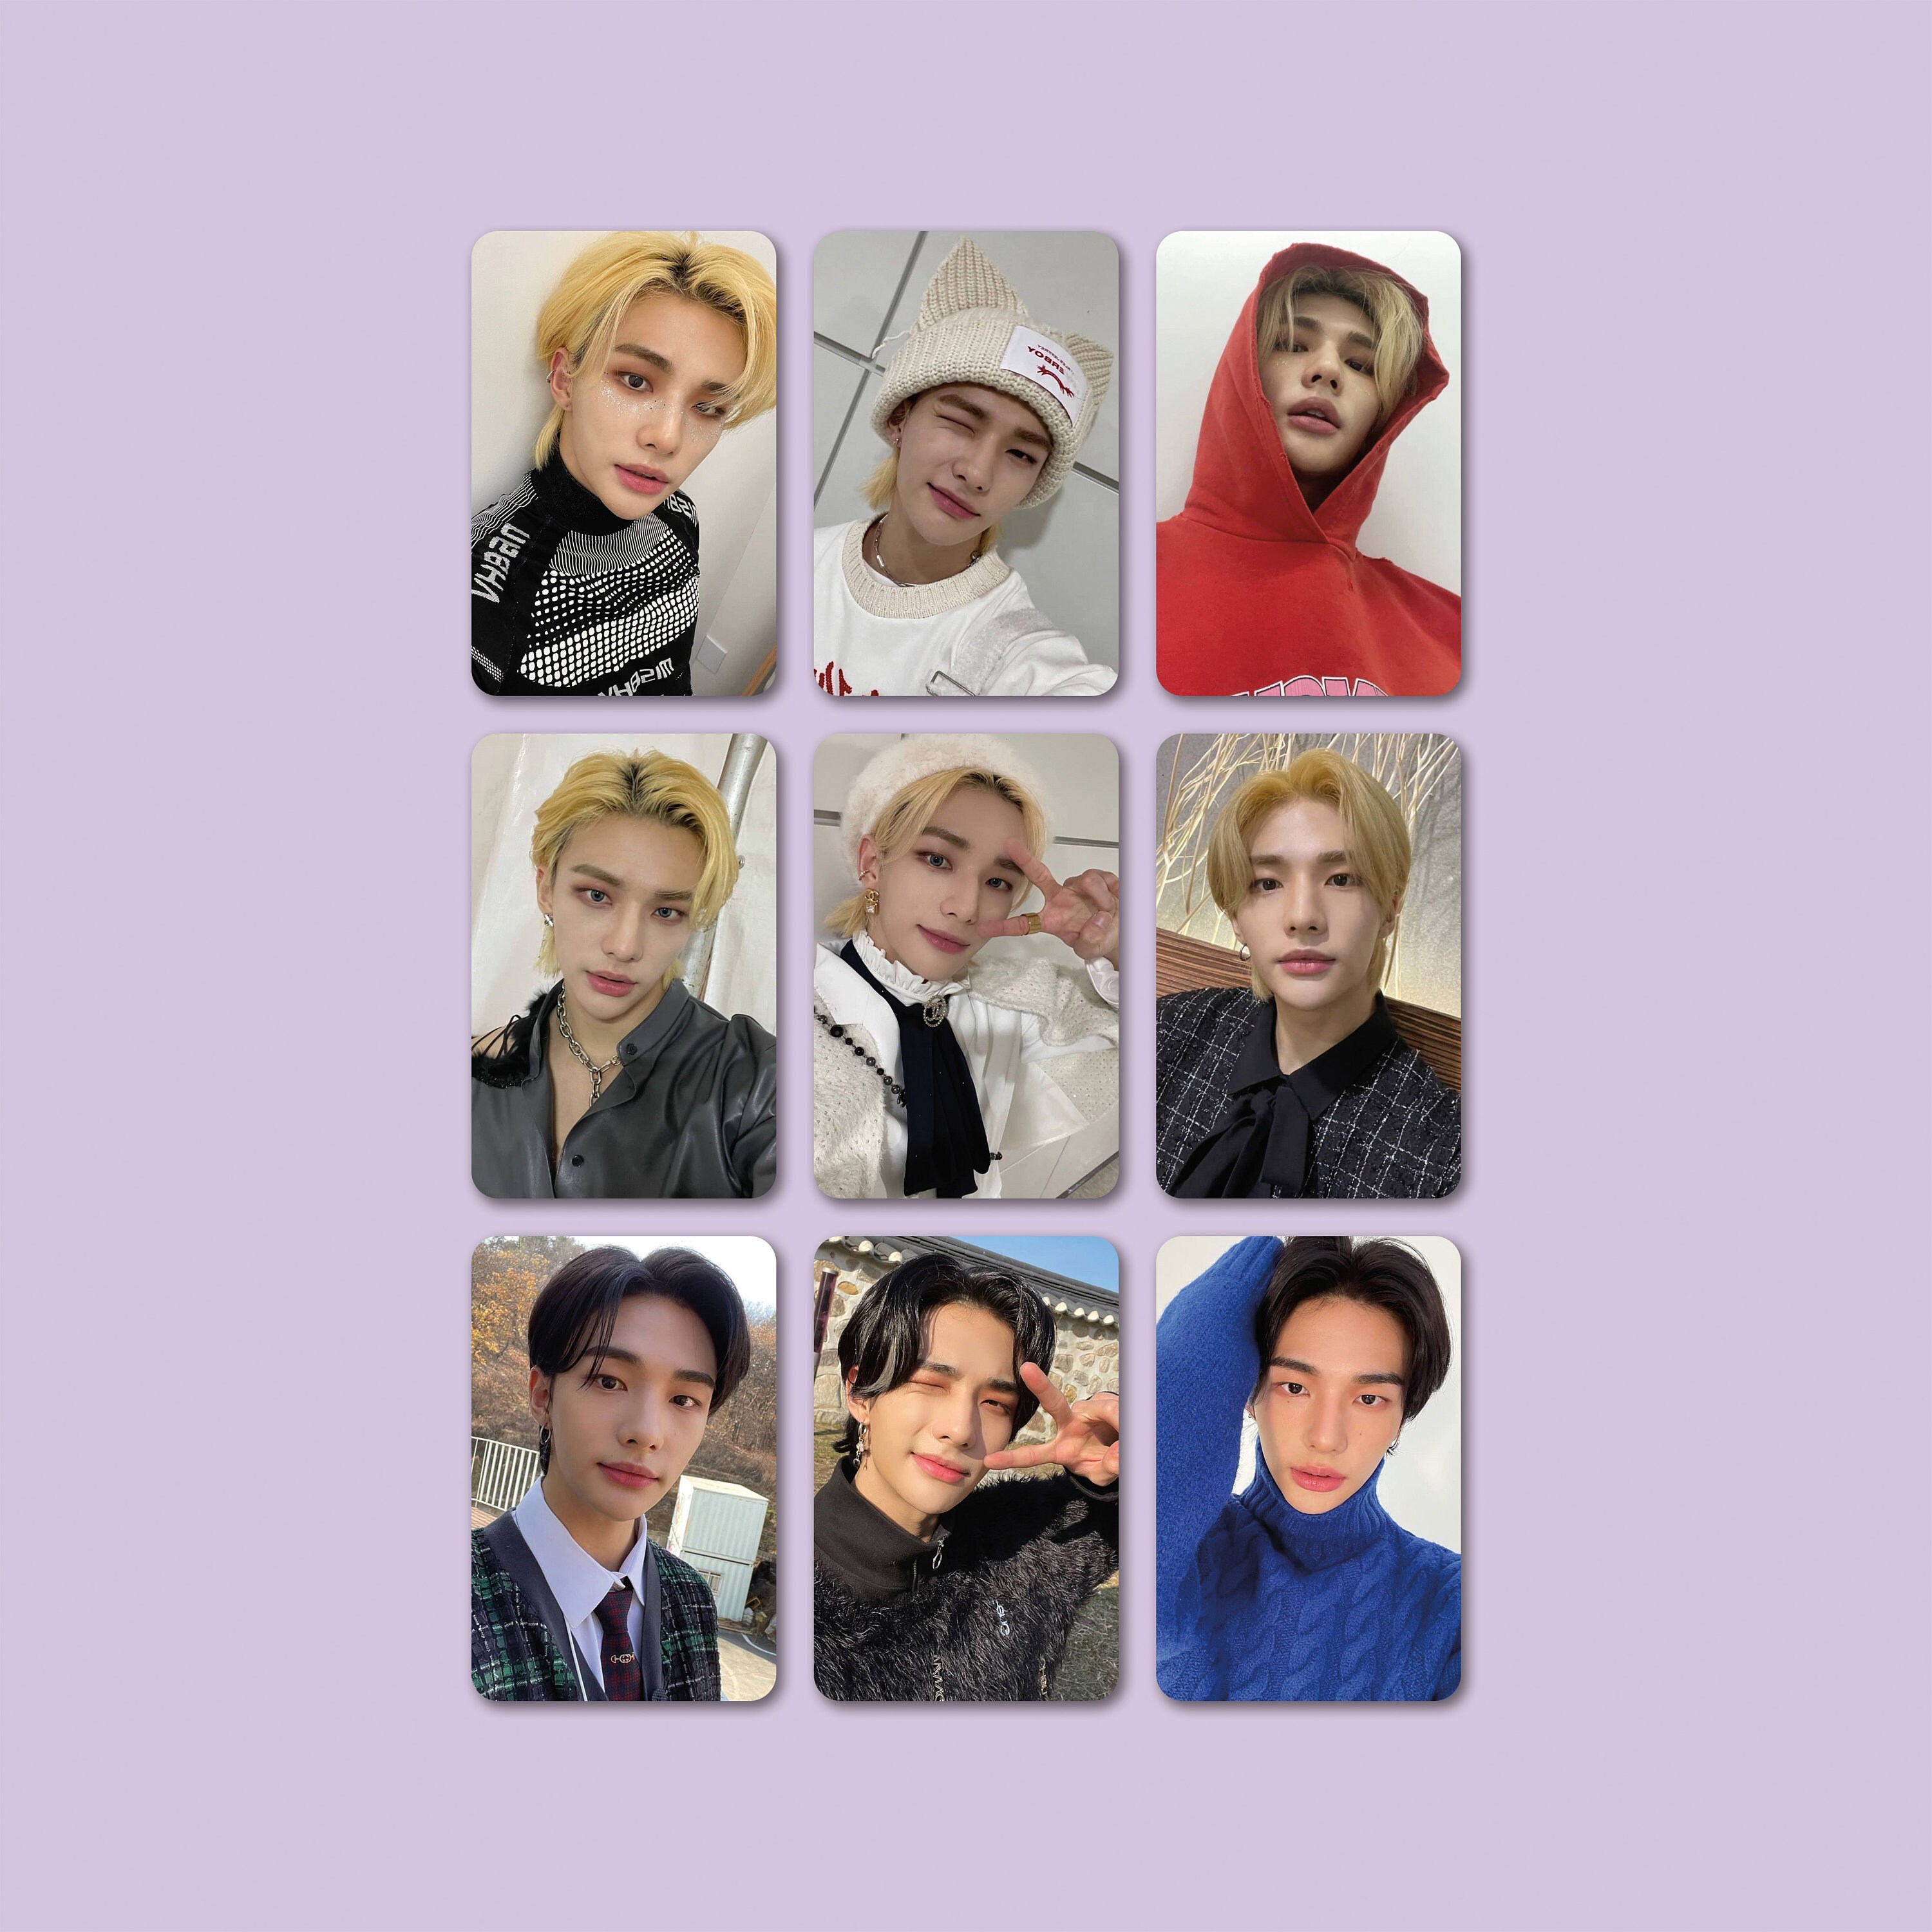 Stray Kids Photocard Set World Tour Maniac in Japan Fanmade Lomo OT8  Perfect Gift for STAY Friends, Mom, Daughter -  Canada